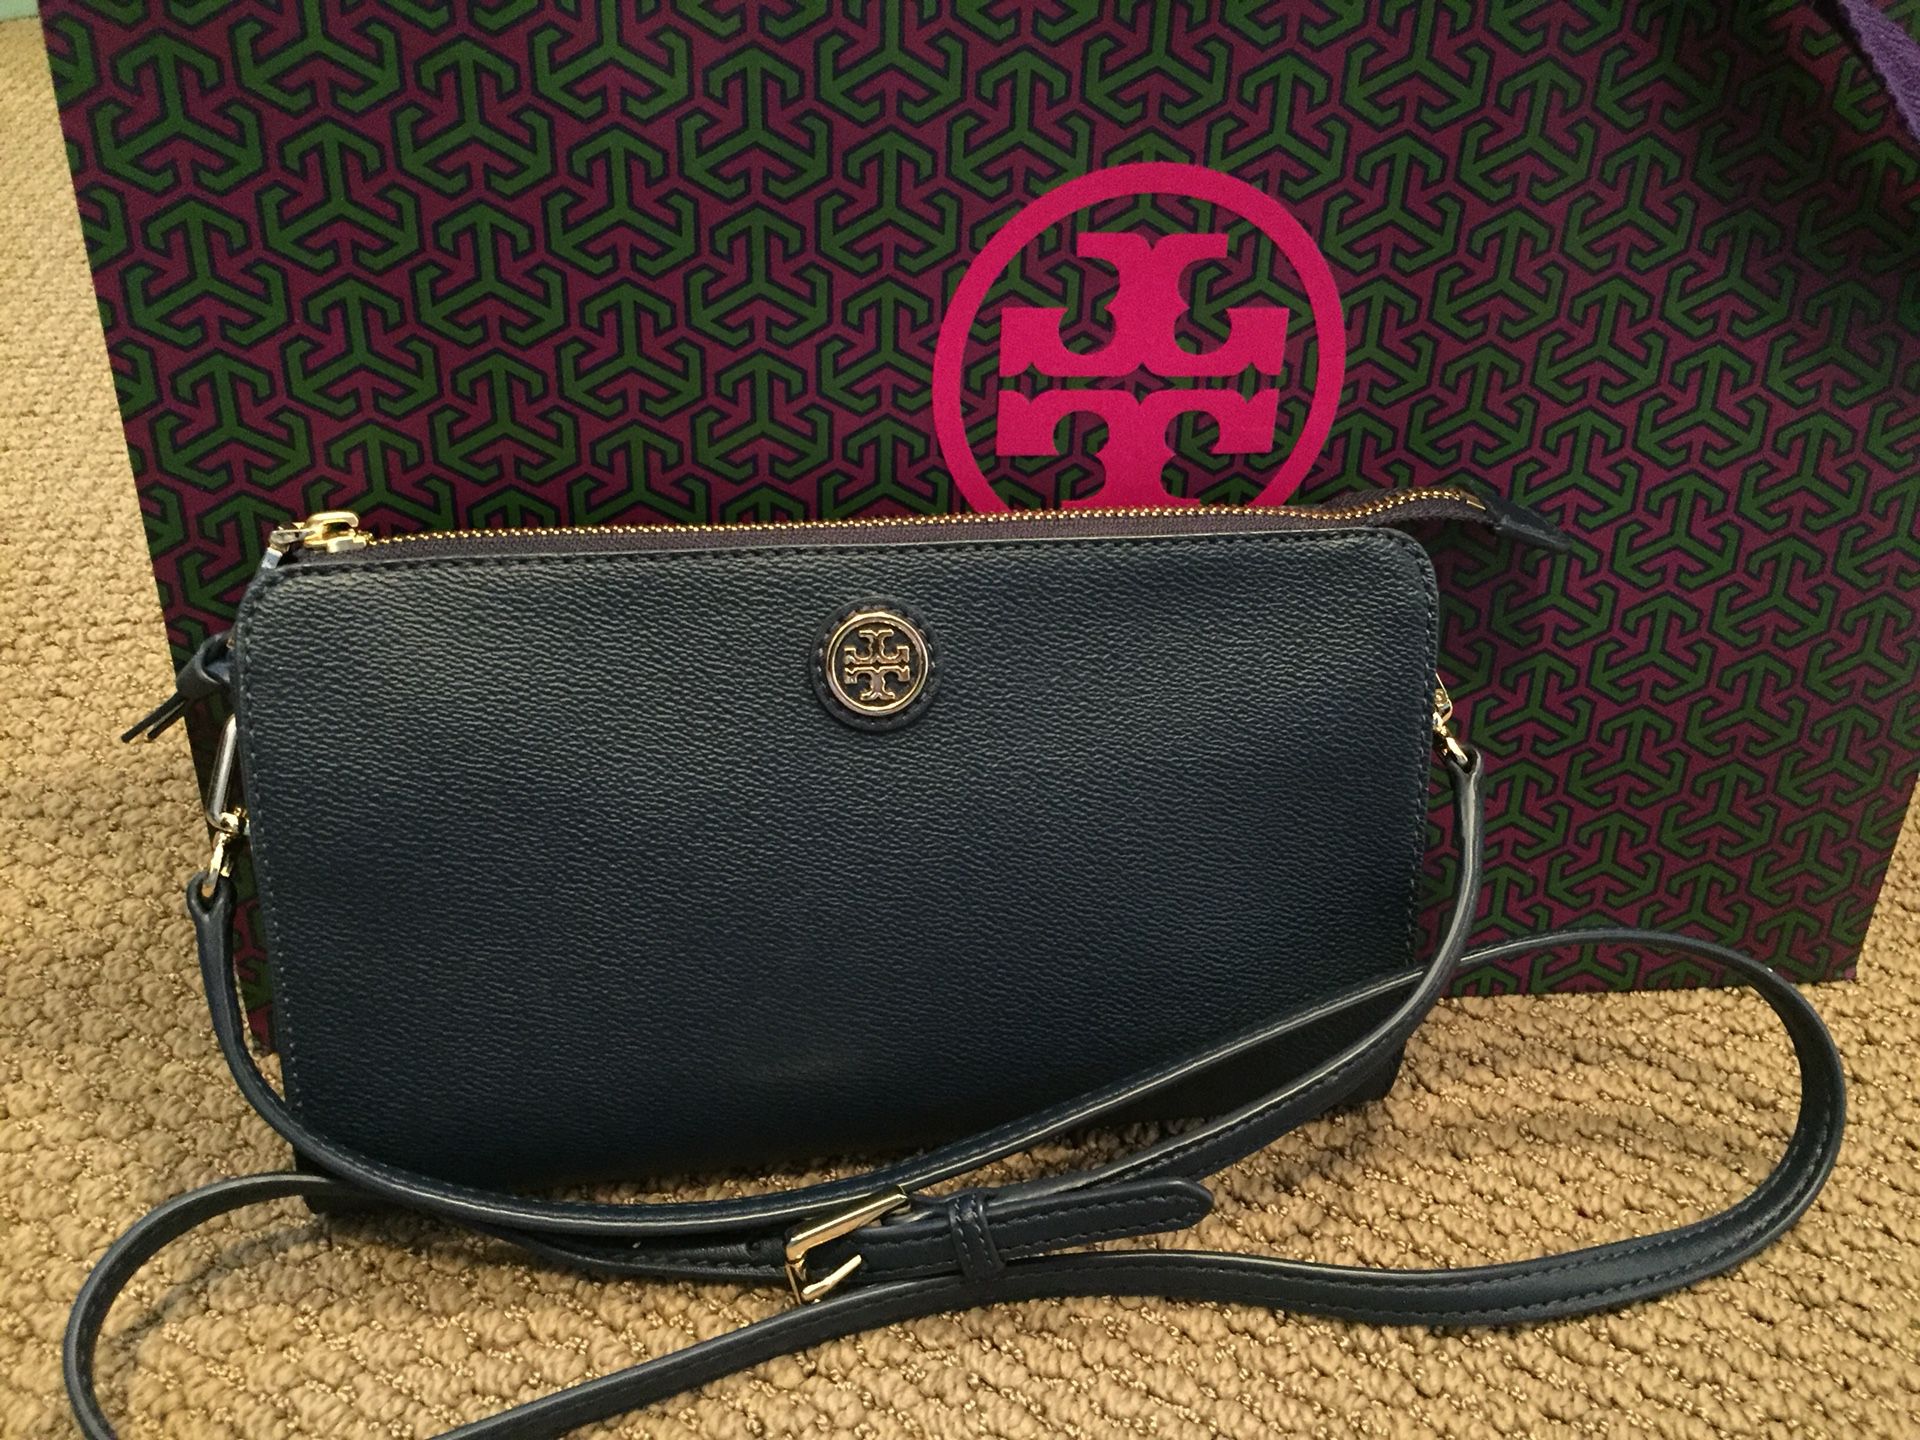 Tory Burch Cameron easy crossbody bag for Sale in Temecula, CA - OfferUp